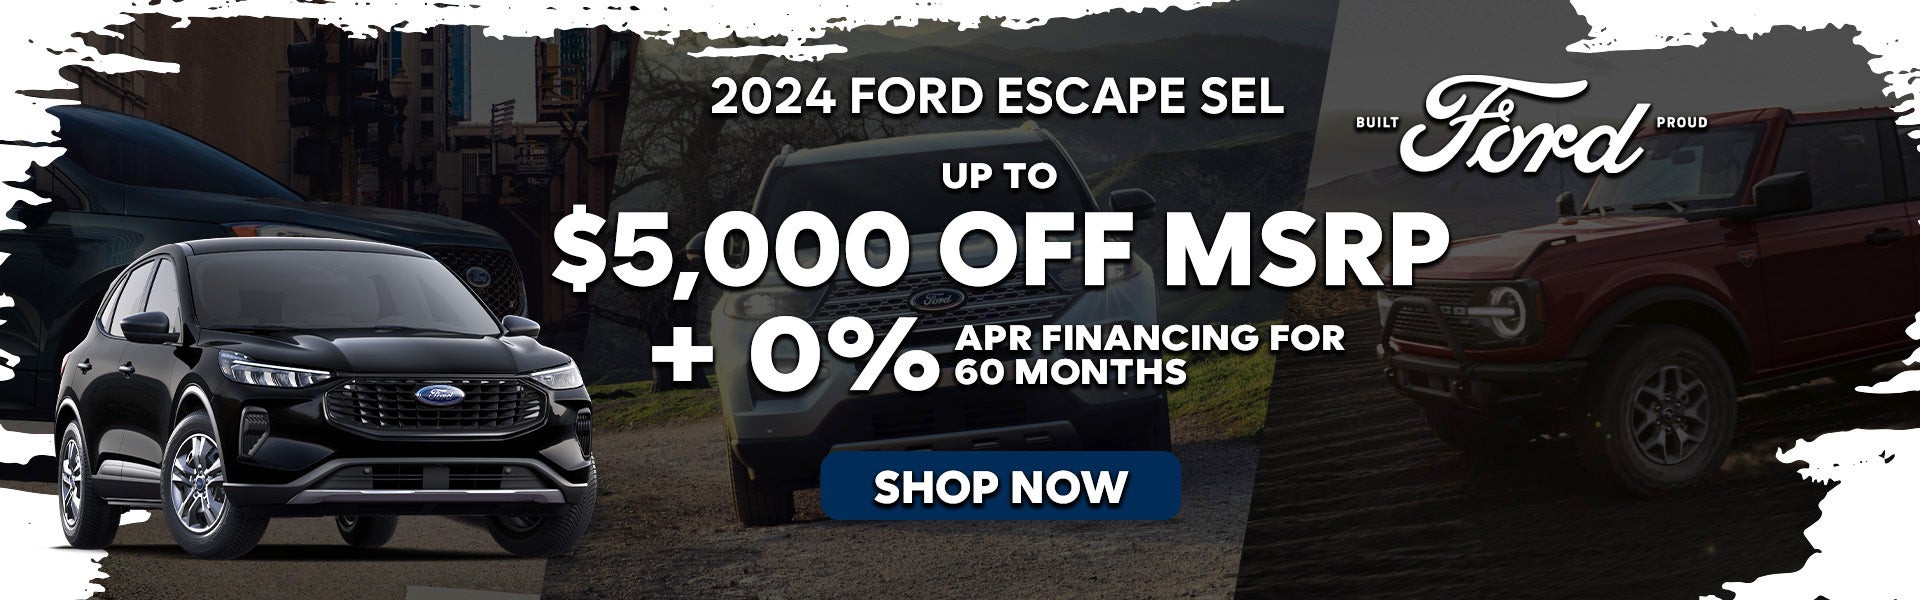 2024 Ford Escape SEL Special Offer